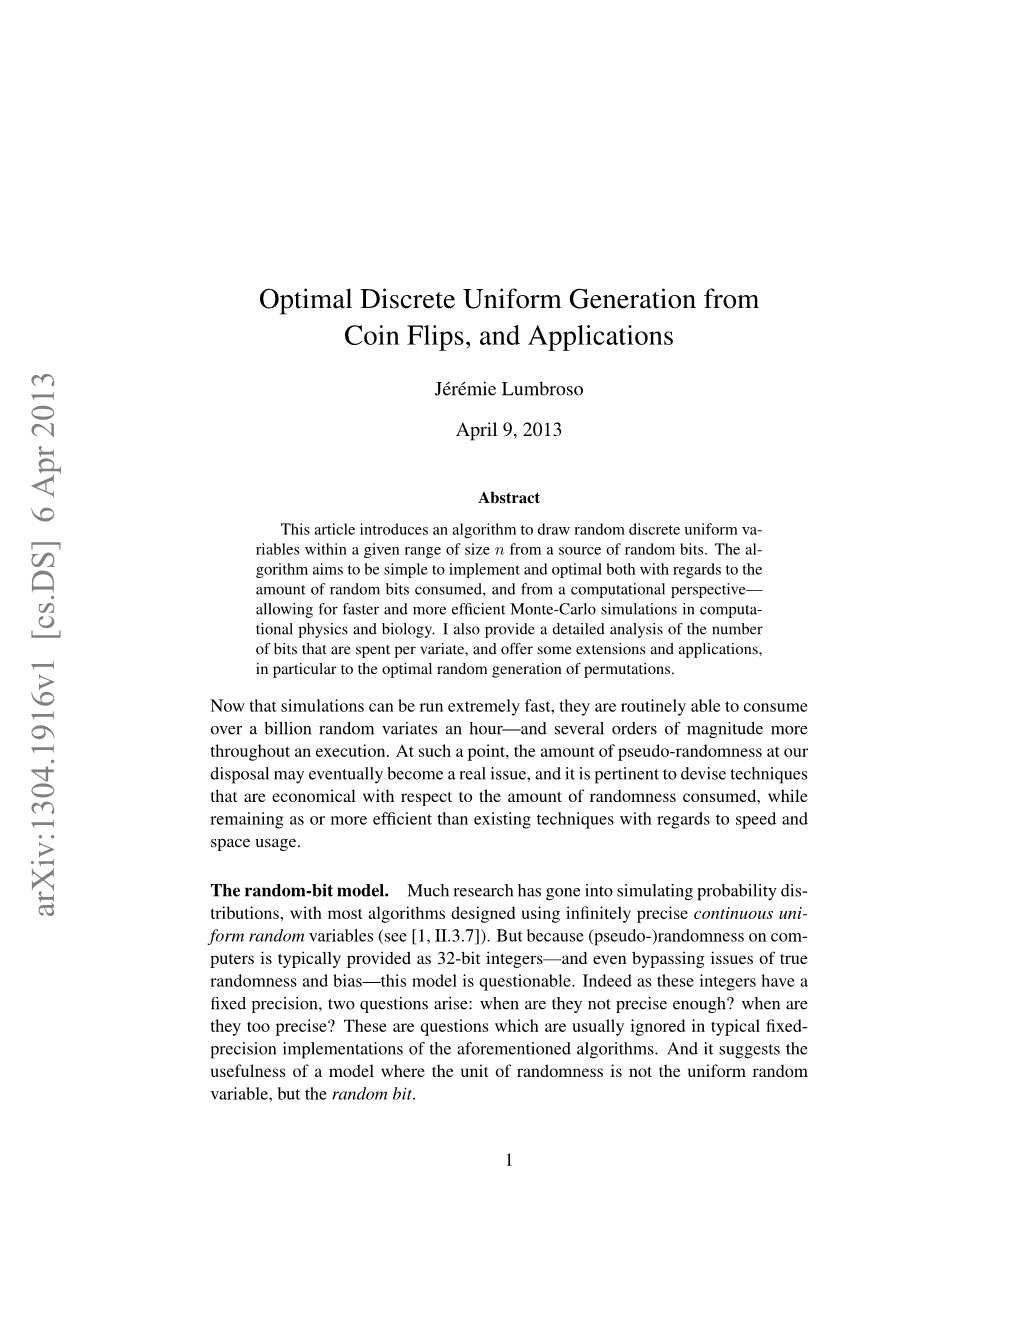 Optimal Discrete Uniform Generation from Coin Flips, and Applications